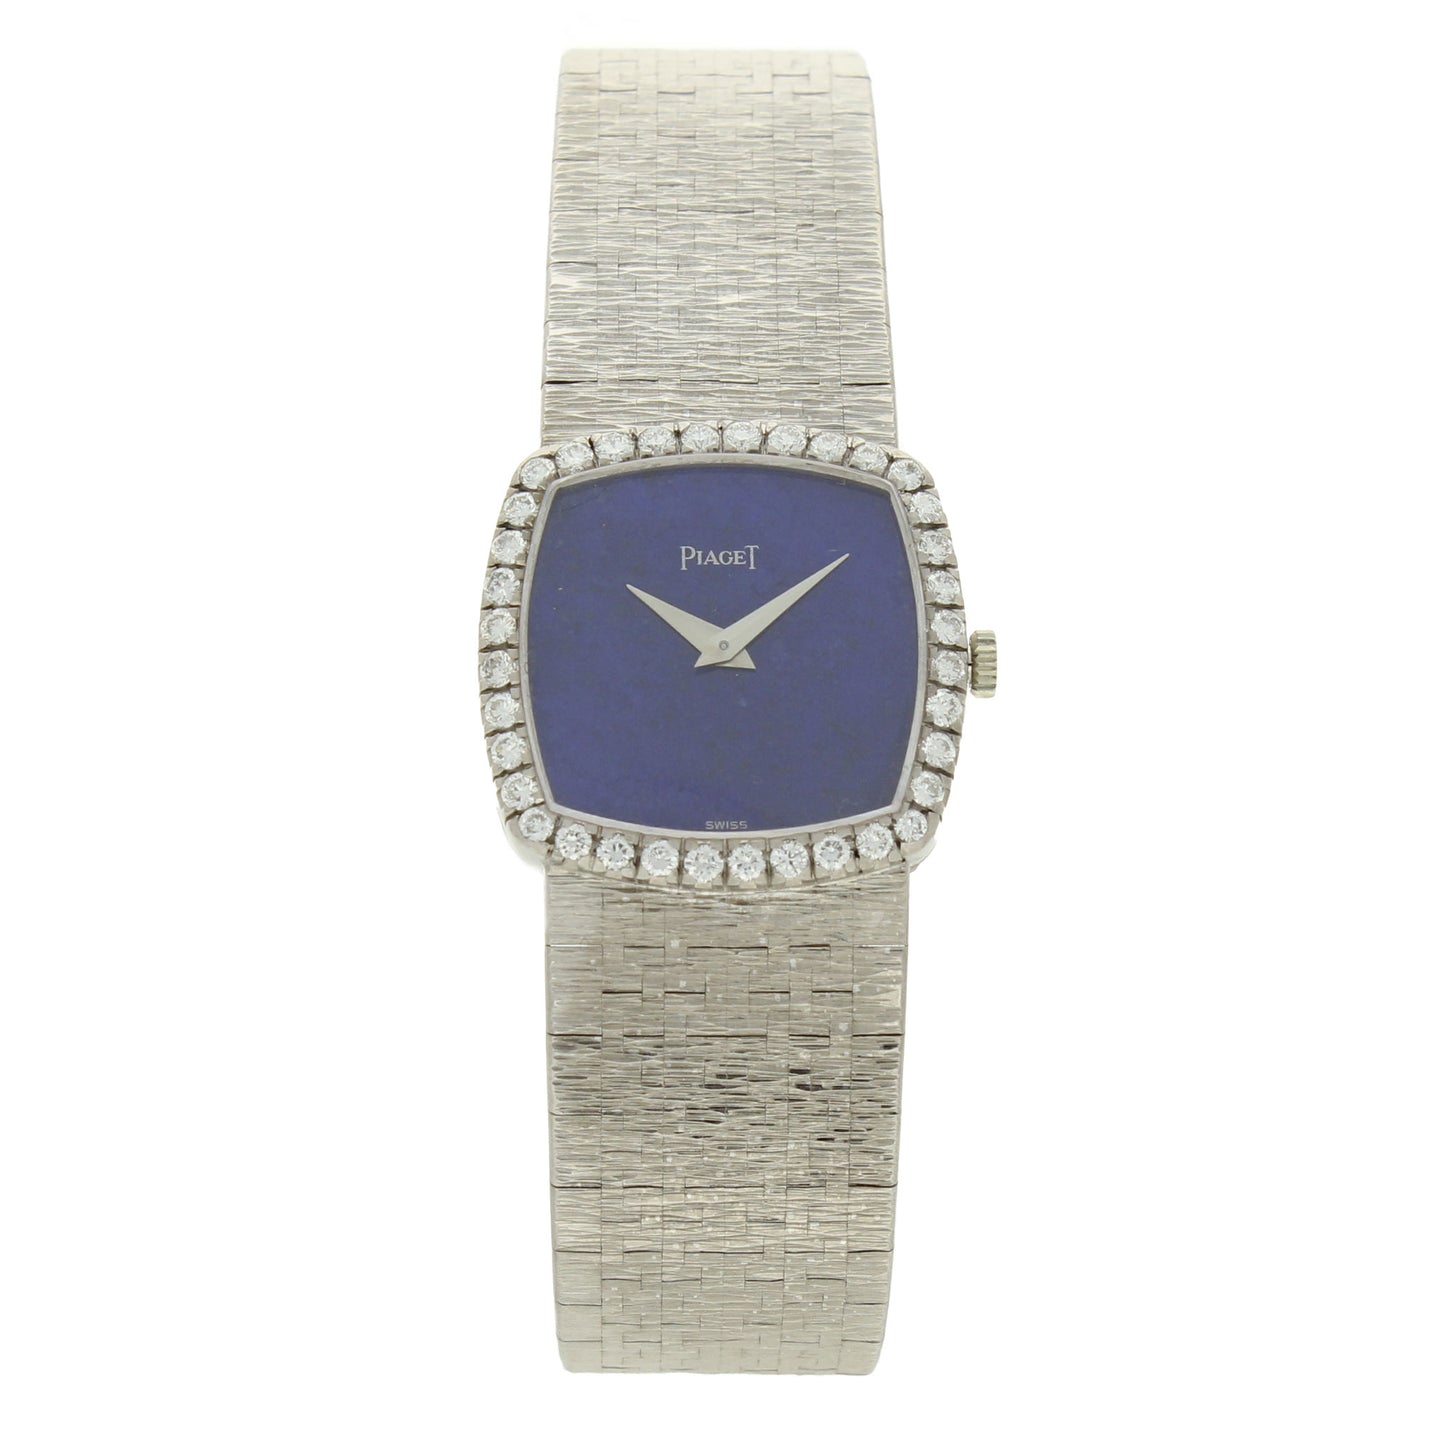 18ct white gold 'cushion cased' with lapis lazuli dial and diamond set bezel bracelet watch. Made 1970's